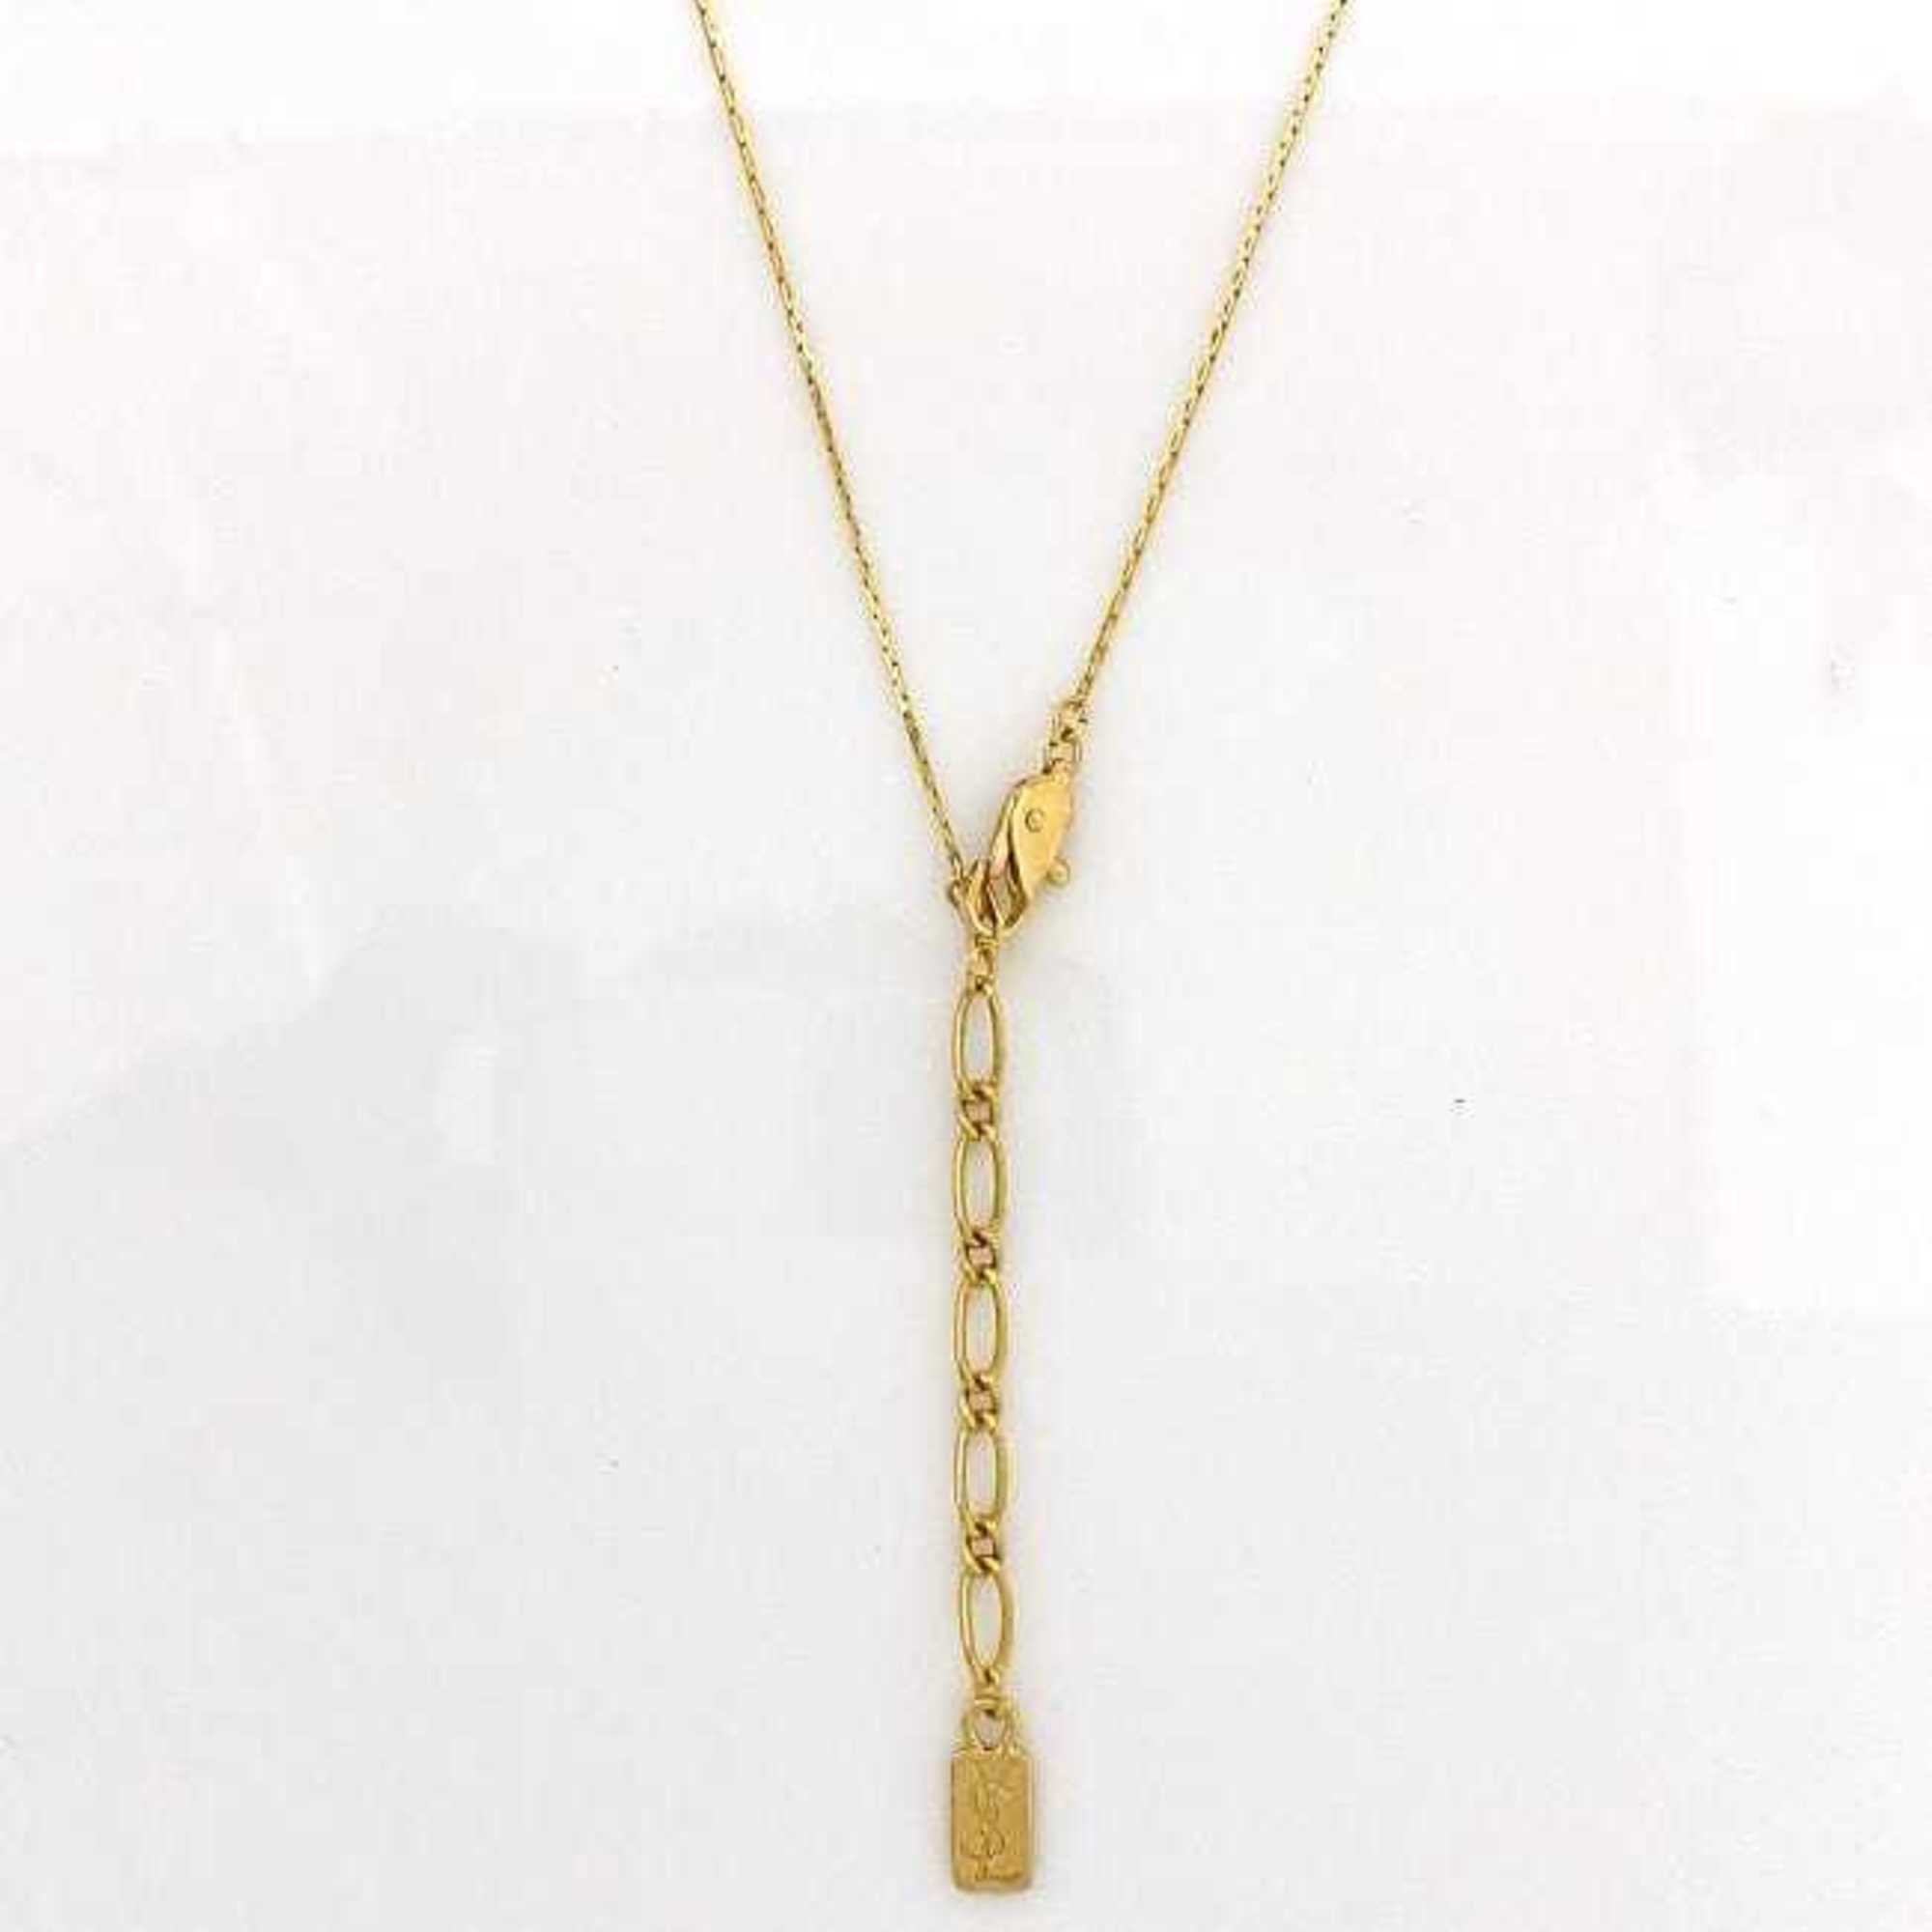 Yves Saint Laurent Necklace Gold Clear Stone GP YVES SAINT LAURENT Ladies